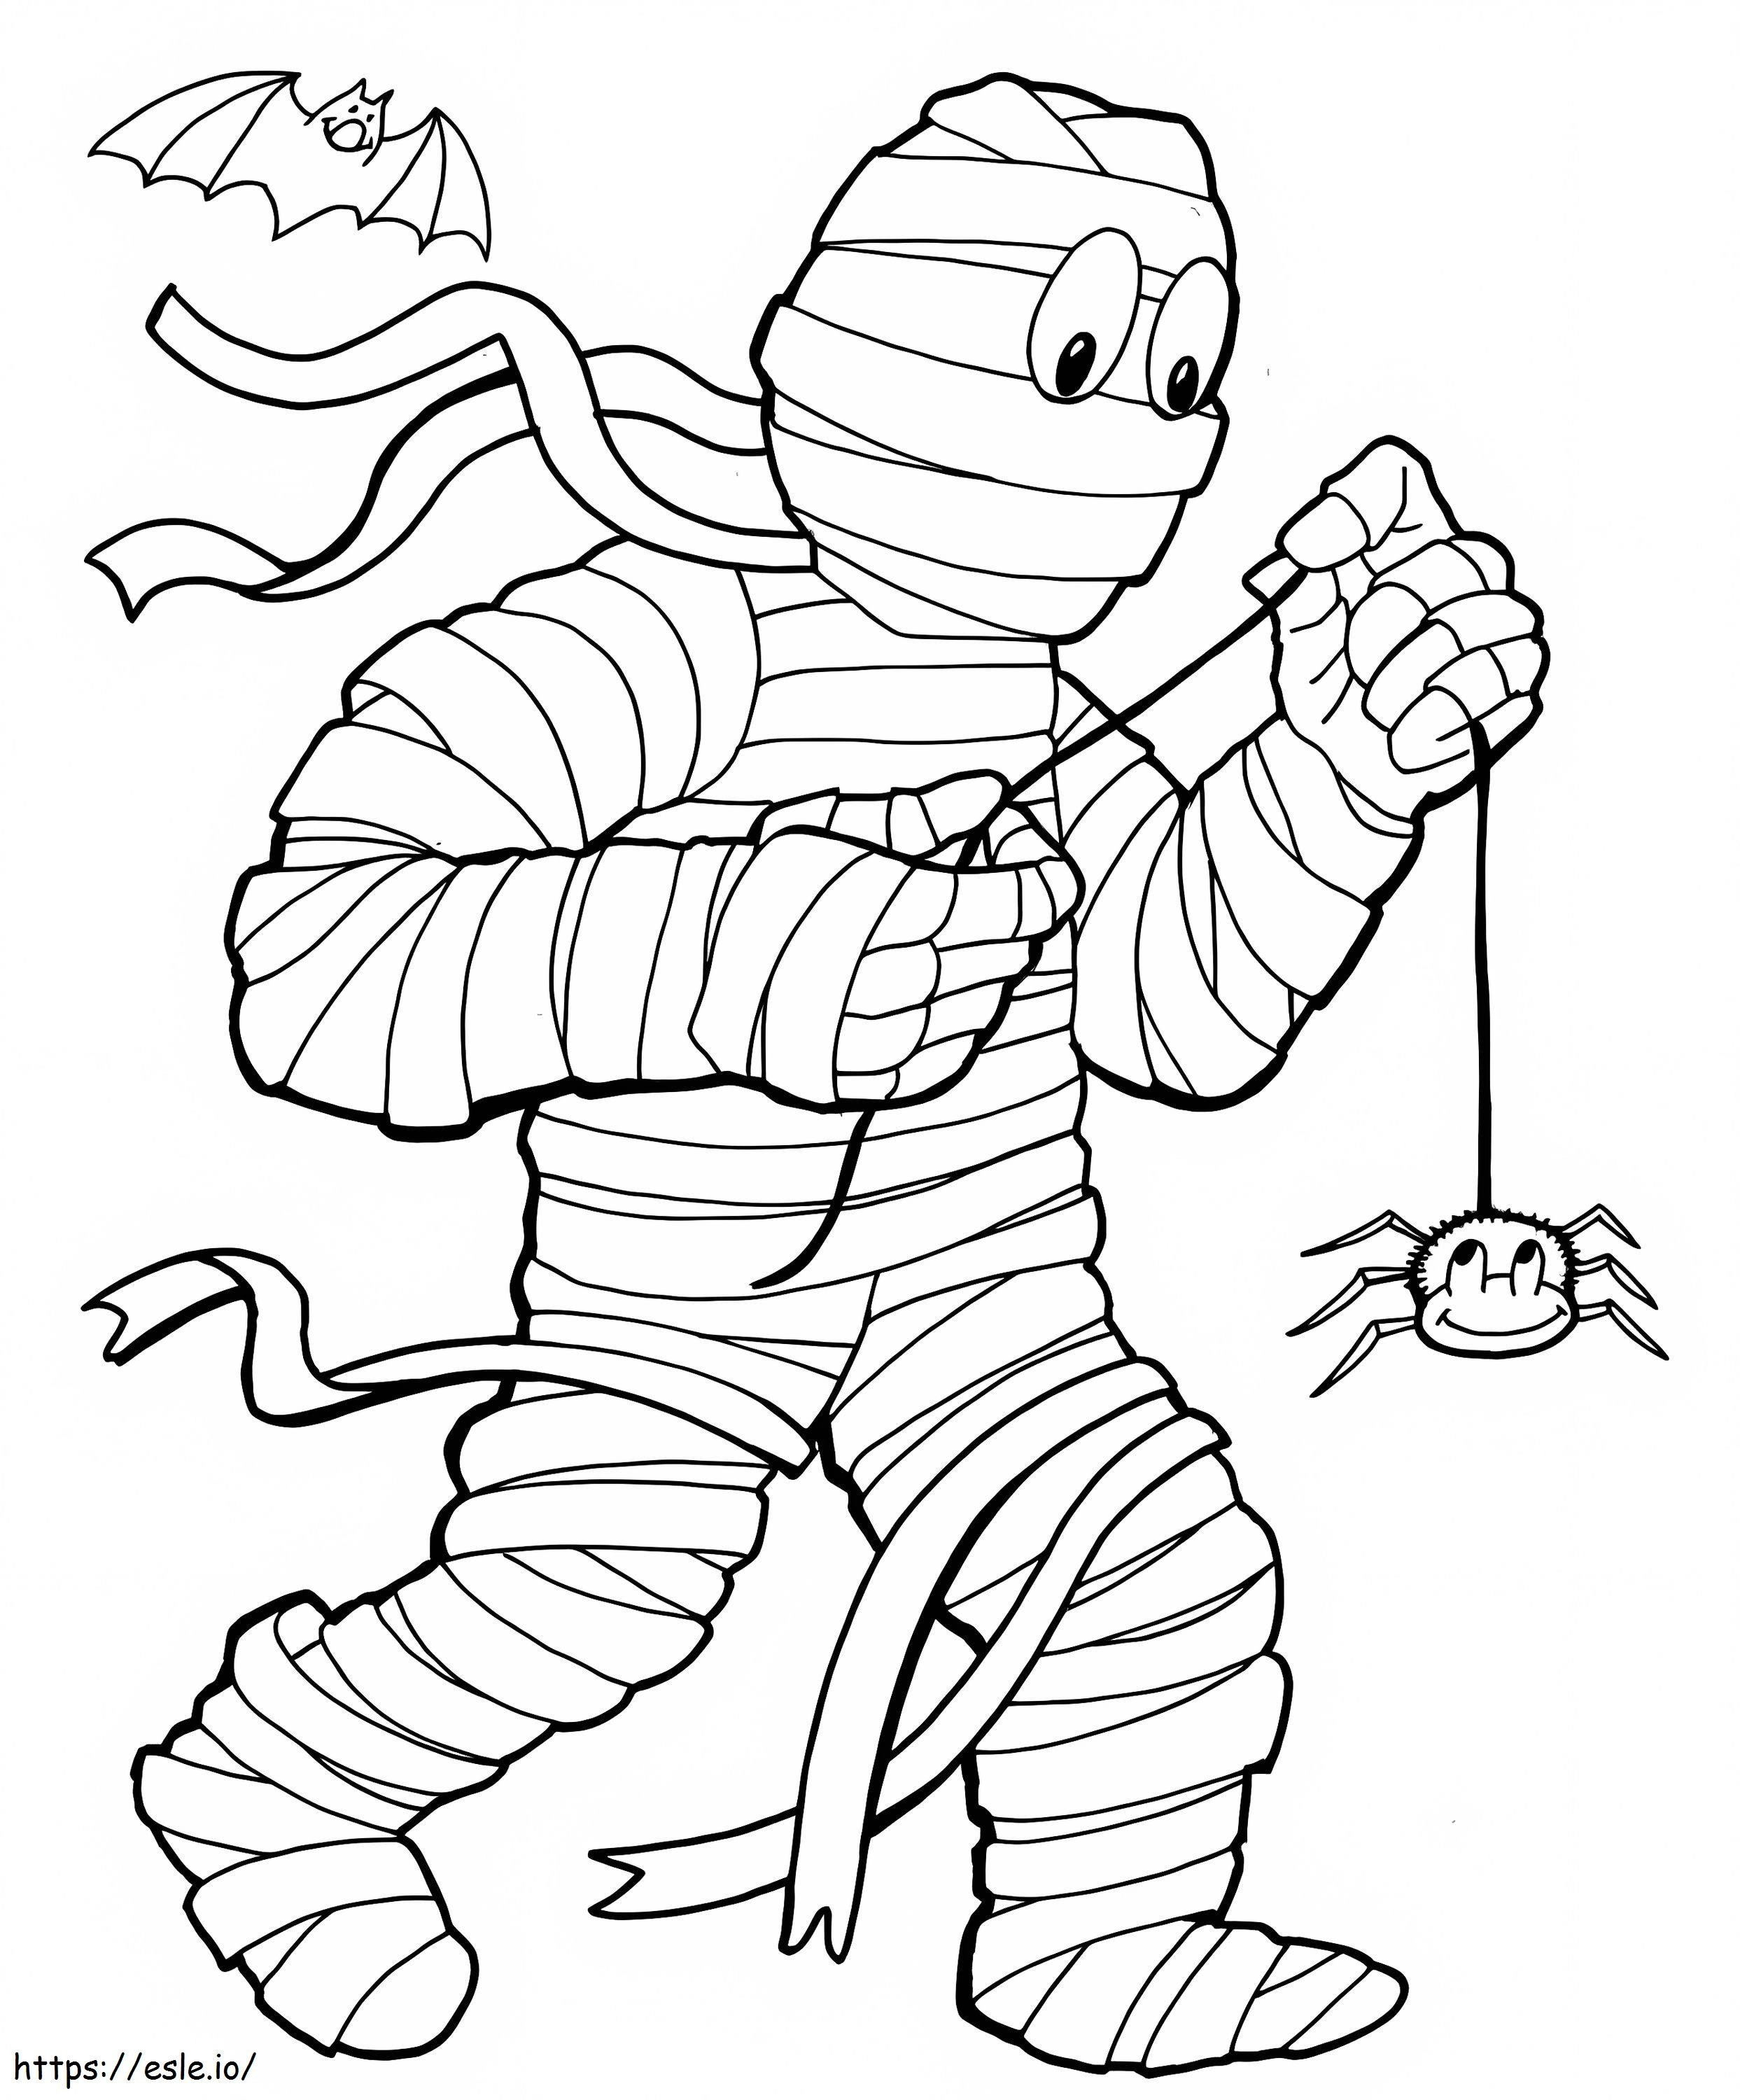 Funny Mummy With Spider coloring page